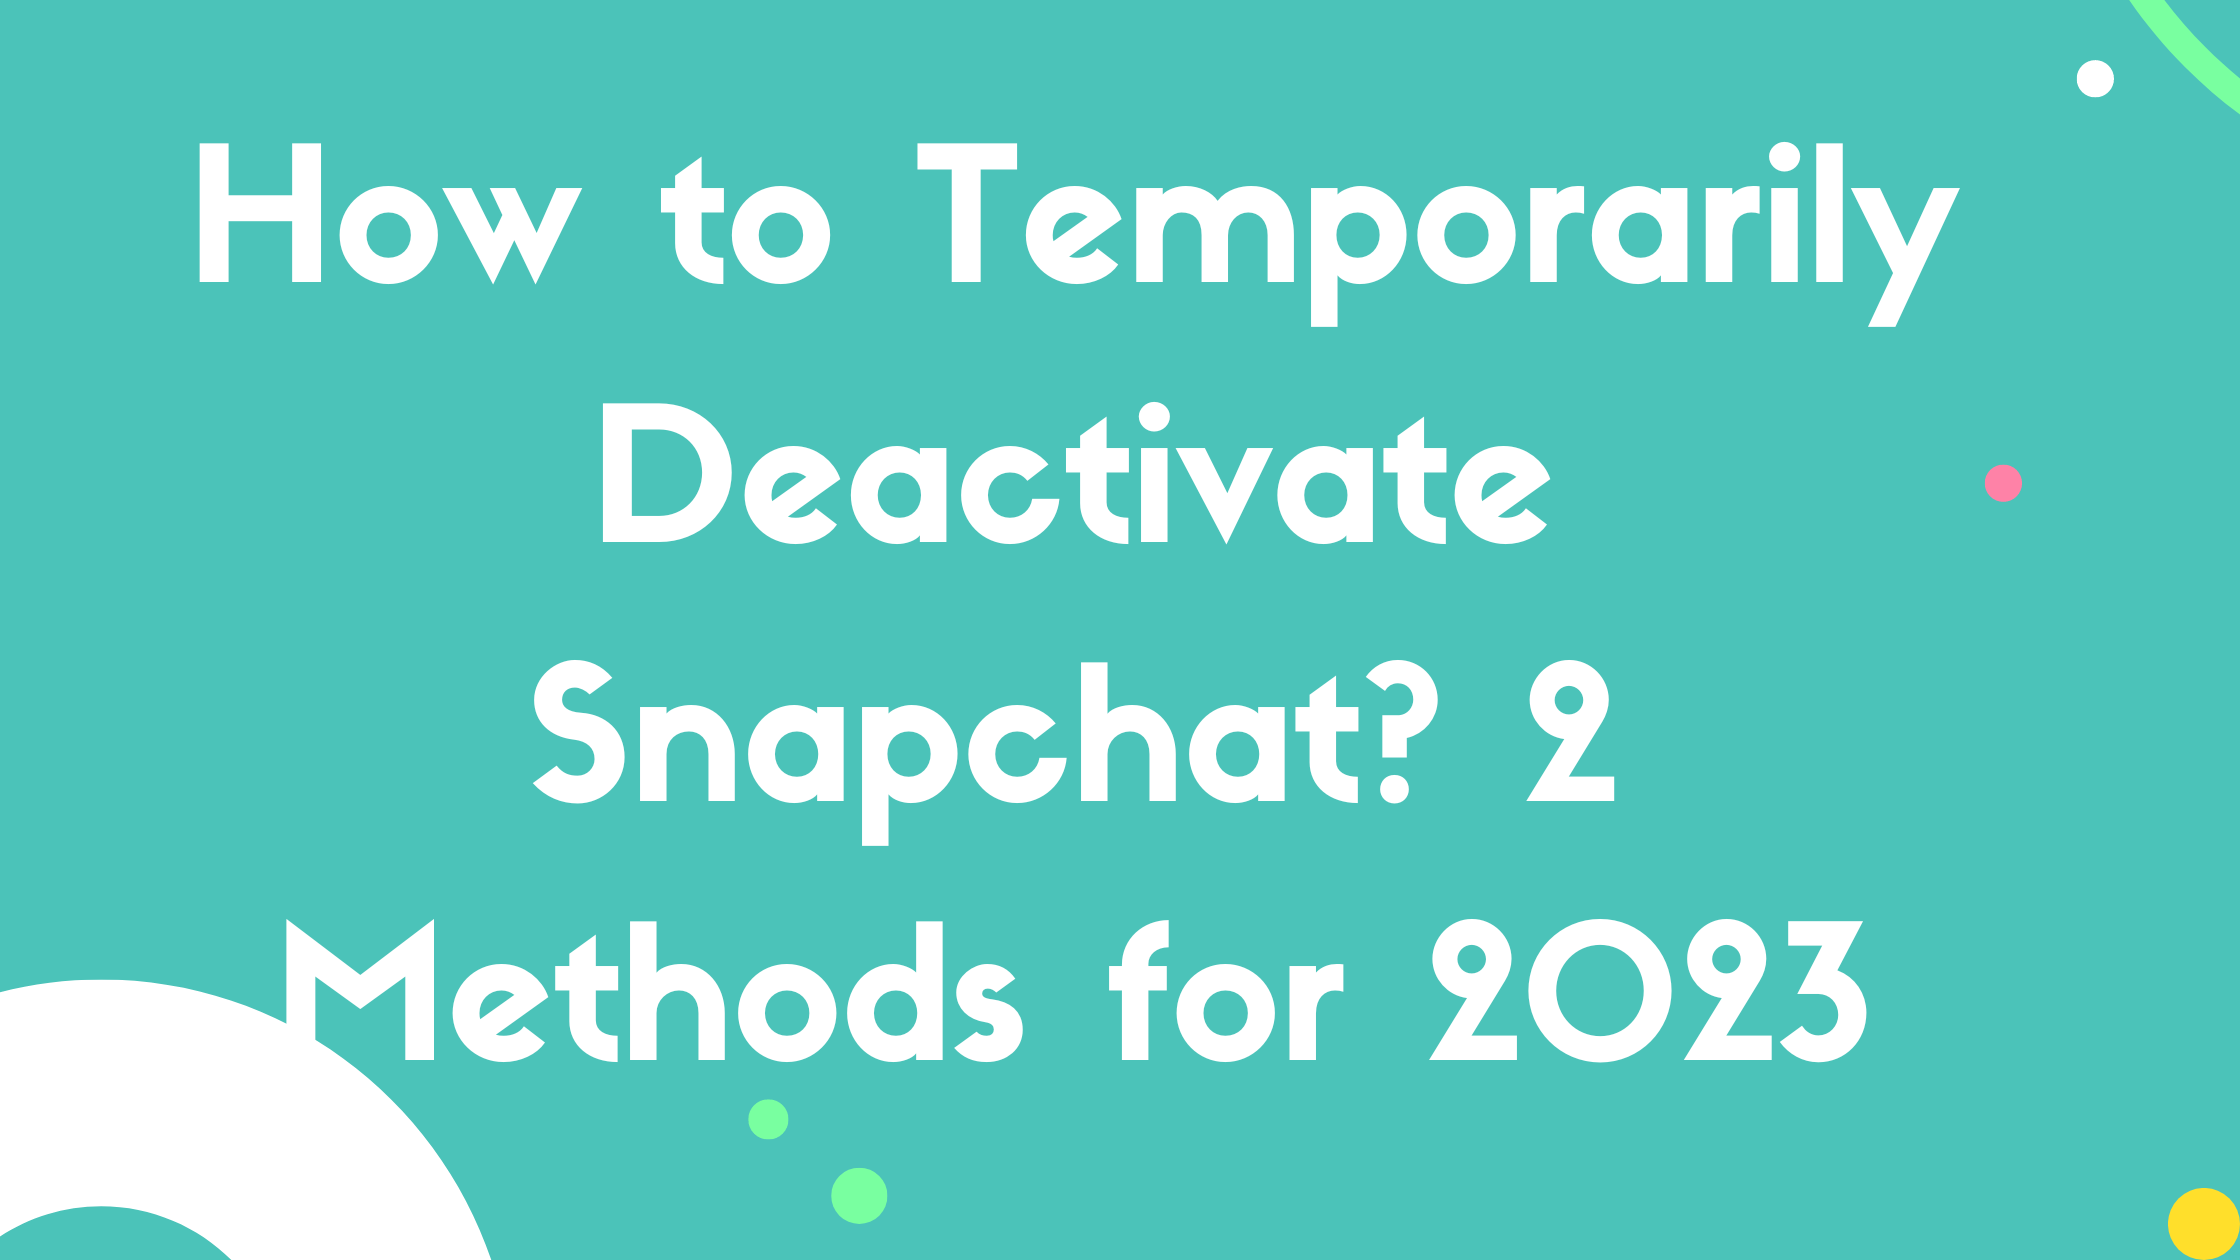 How to Temporarily Deactivate Snapchat? 2 Methods for 2023